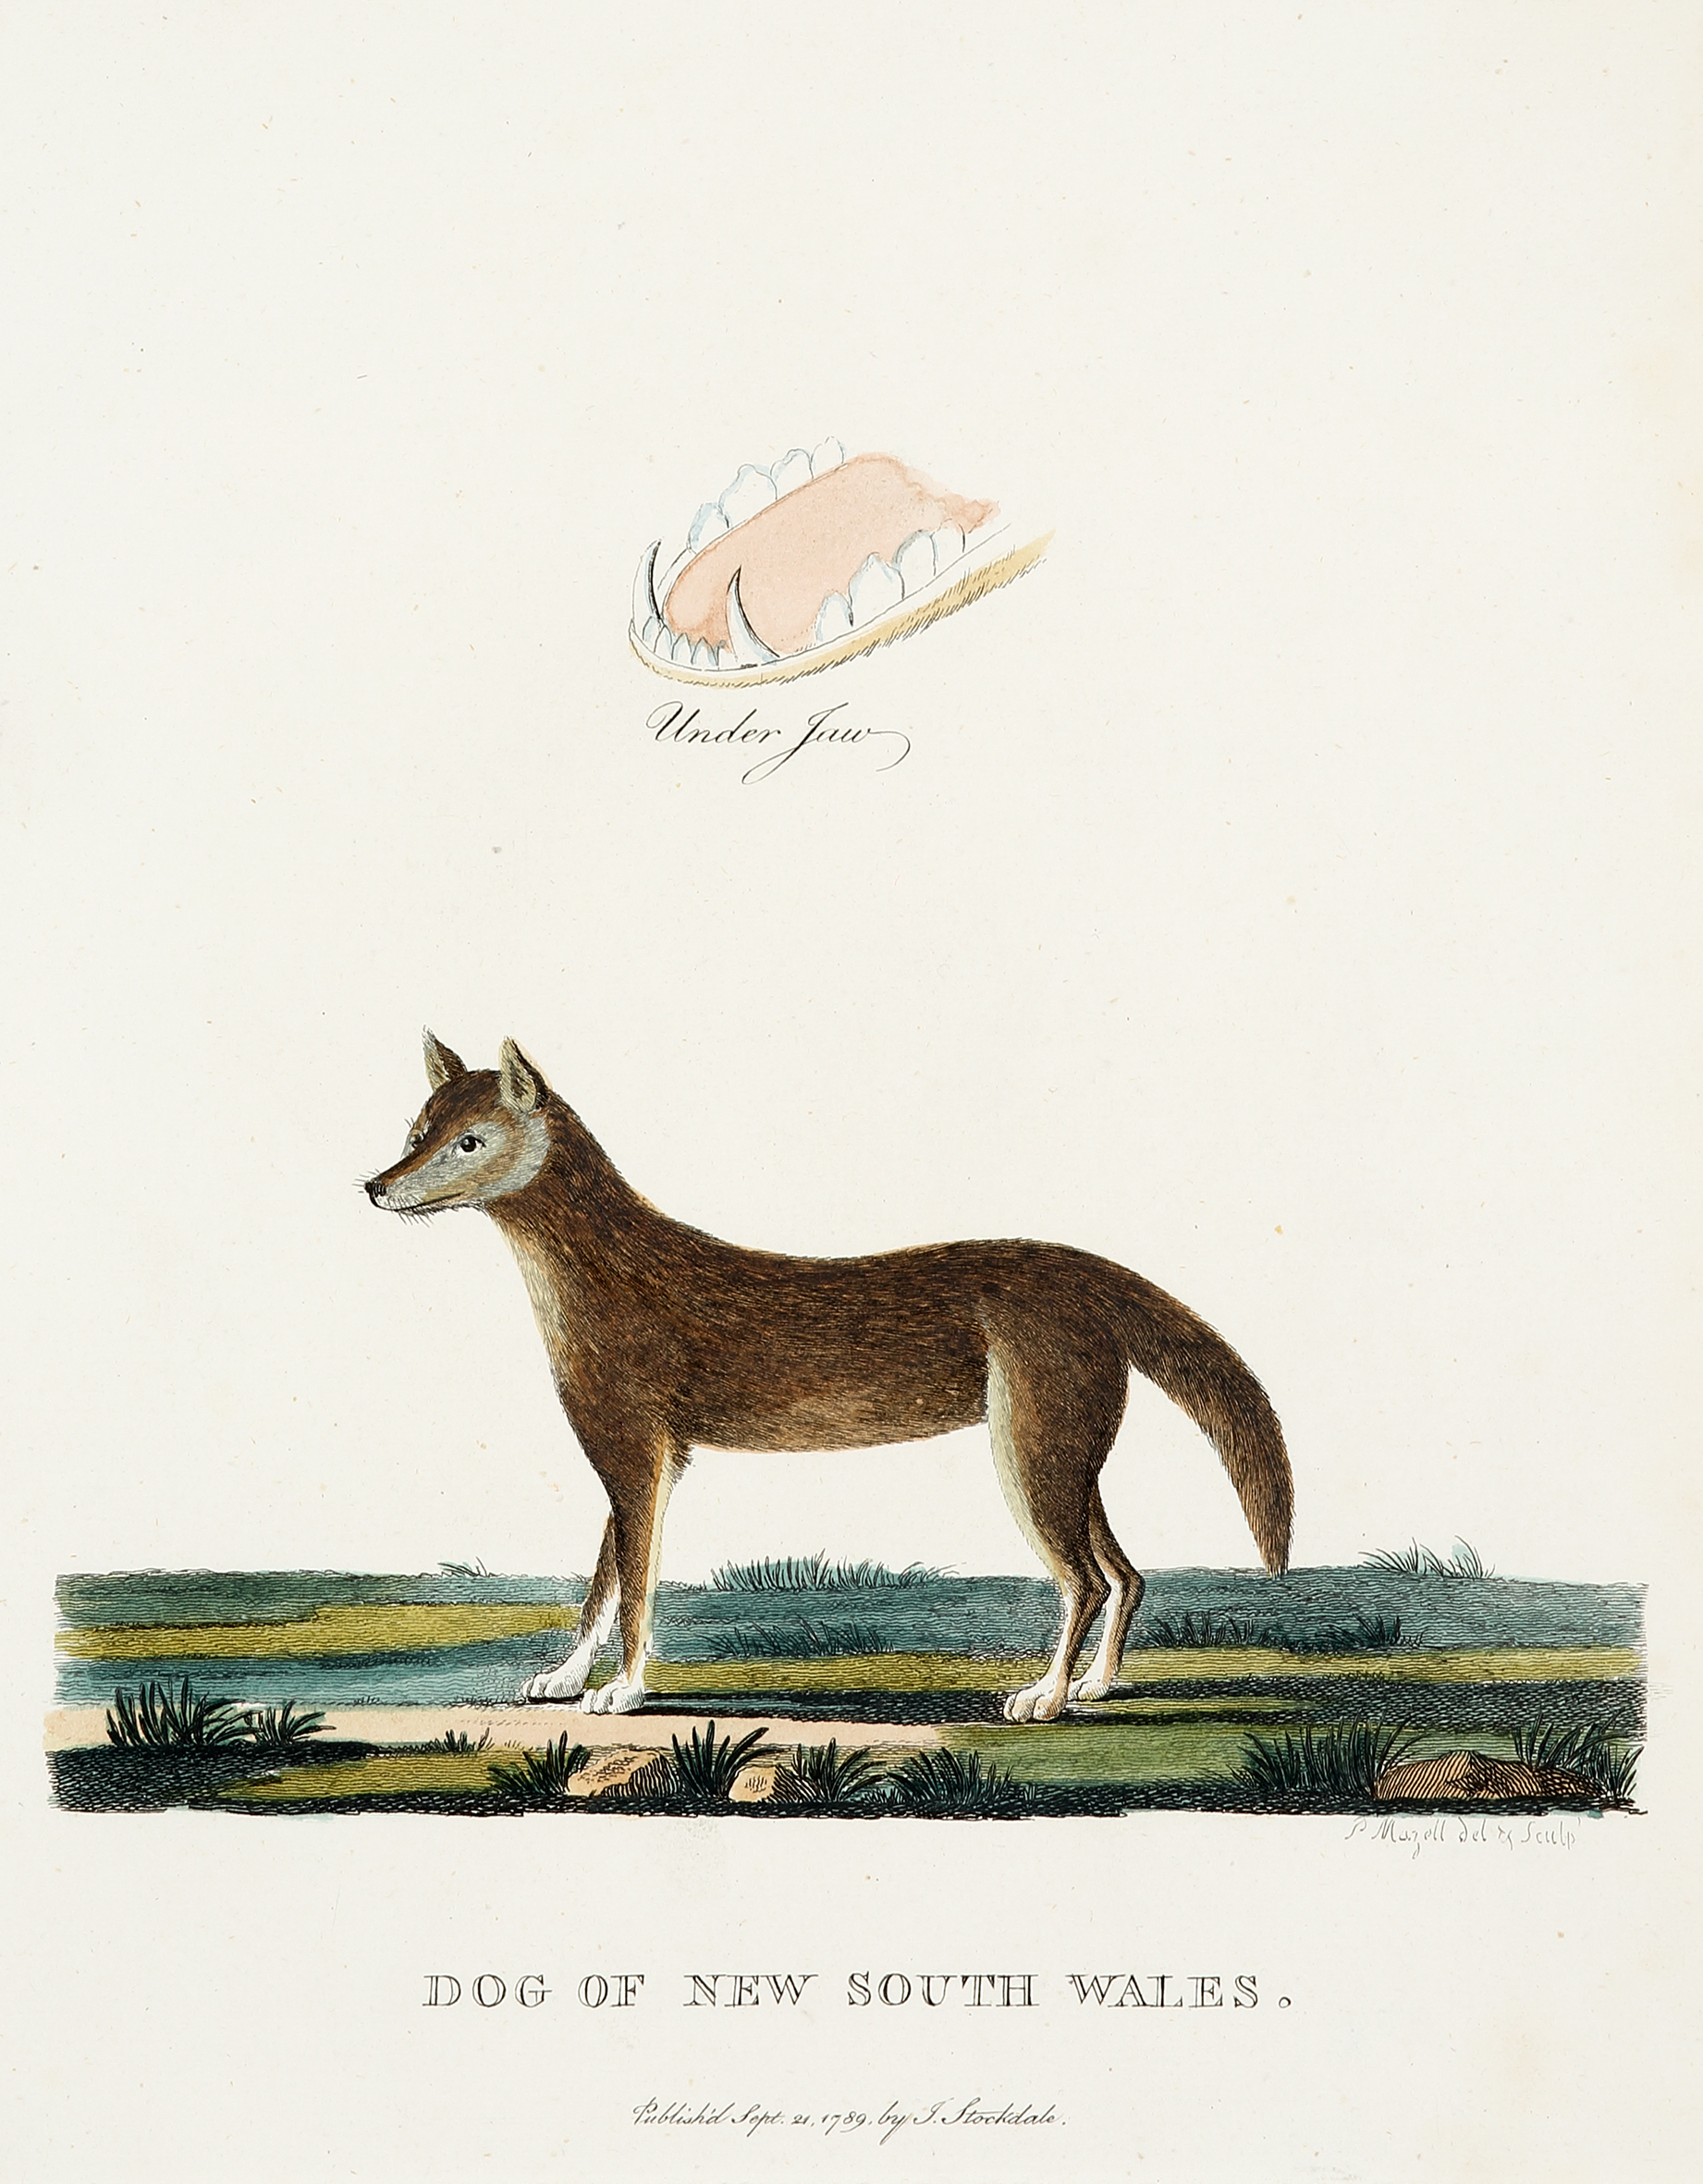 Dog of New South Wales. - Antique Print from 1789